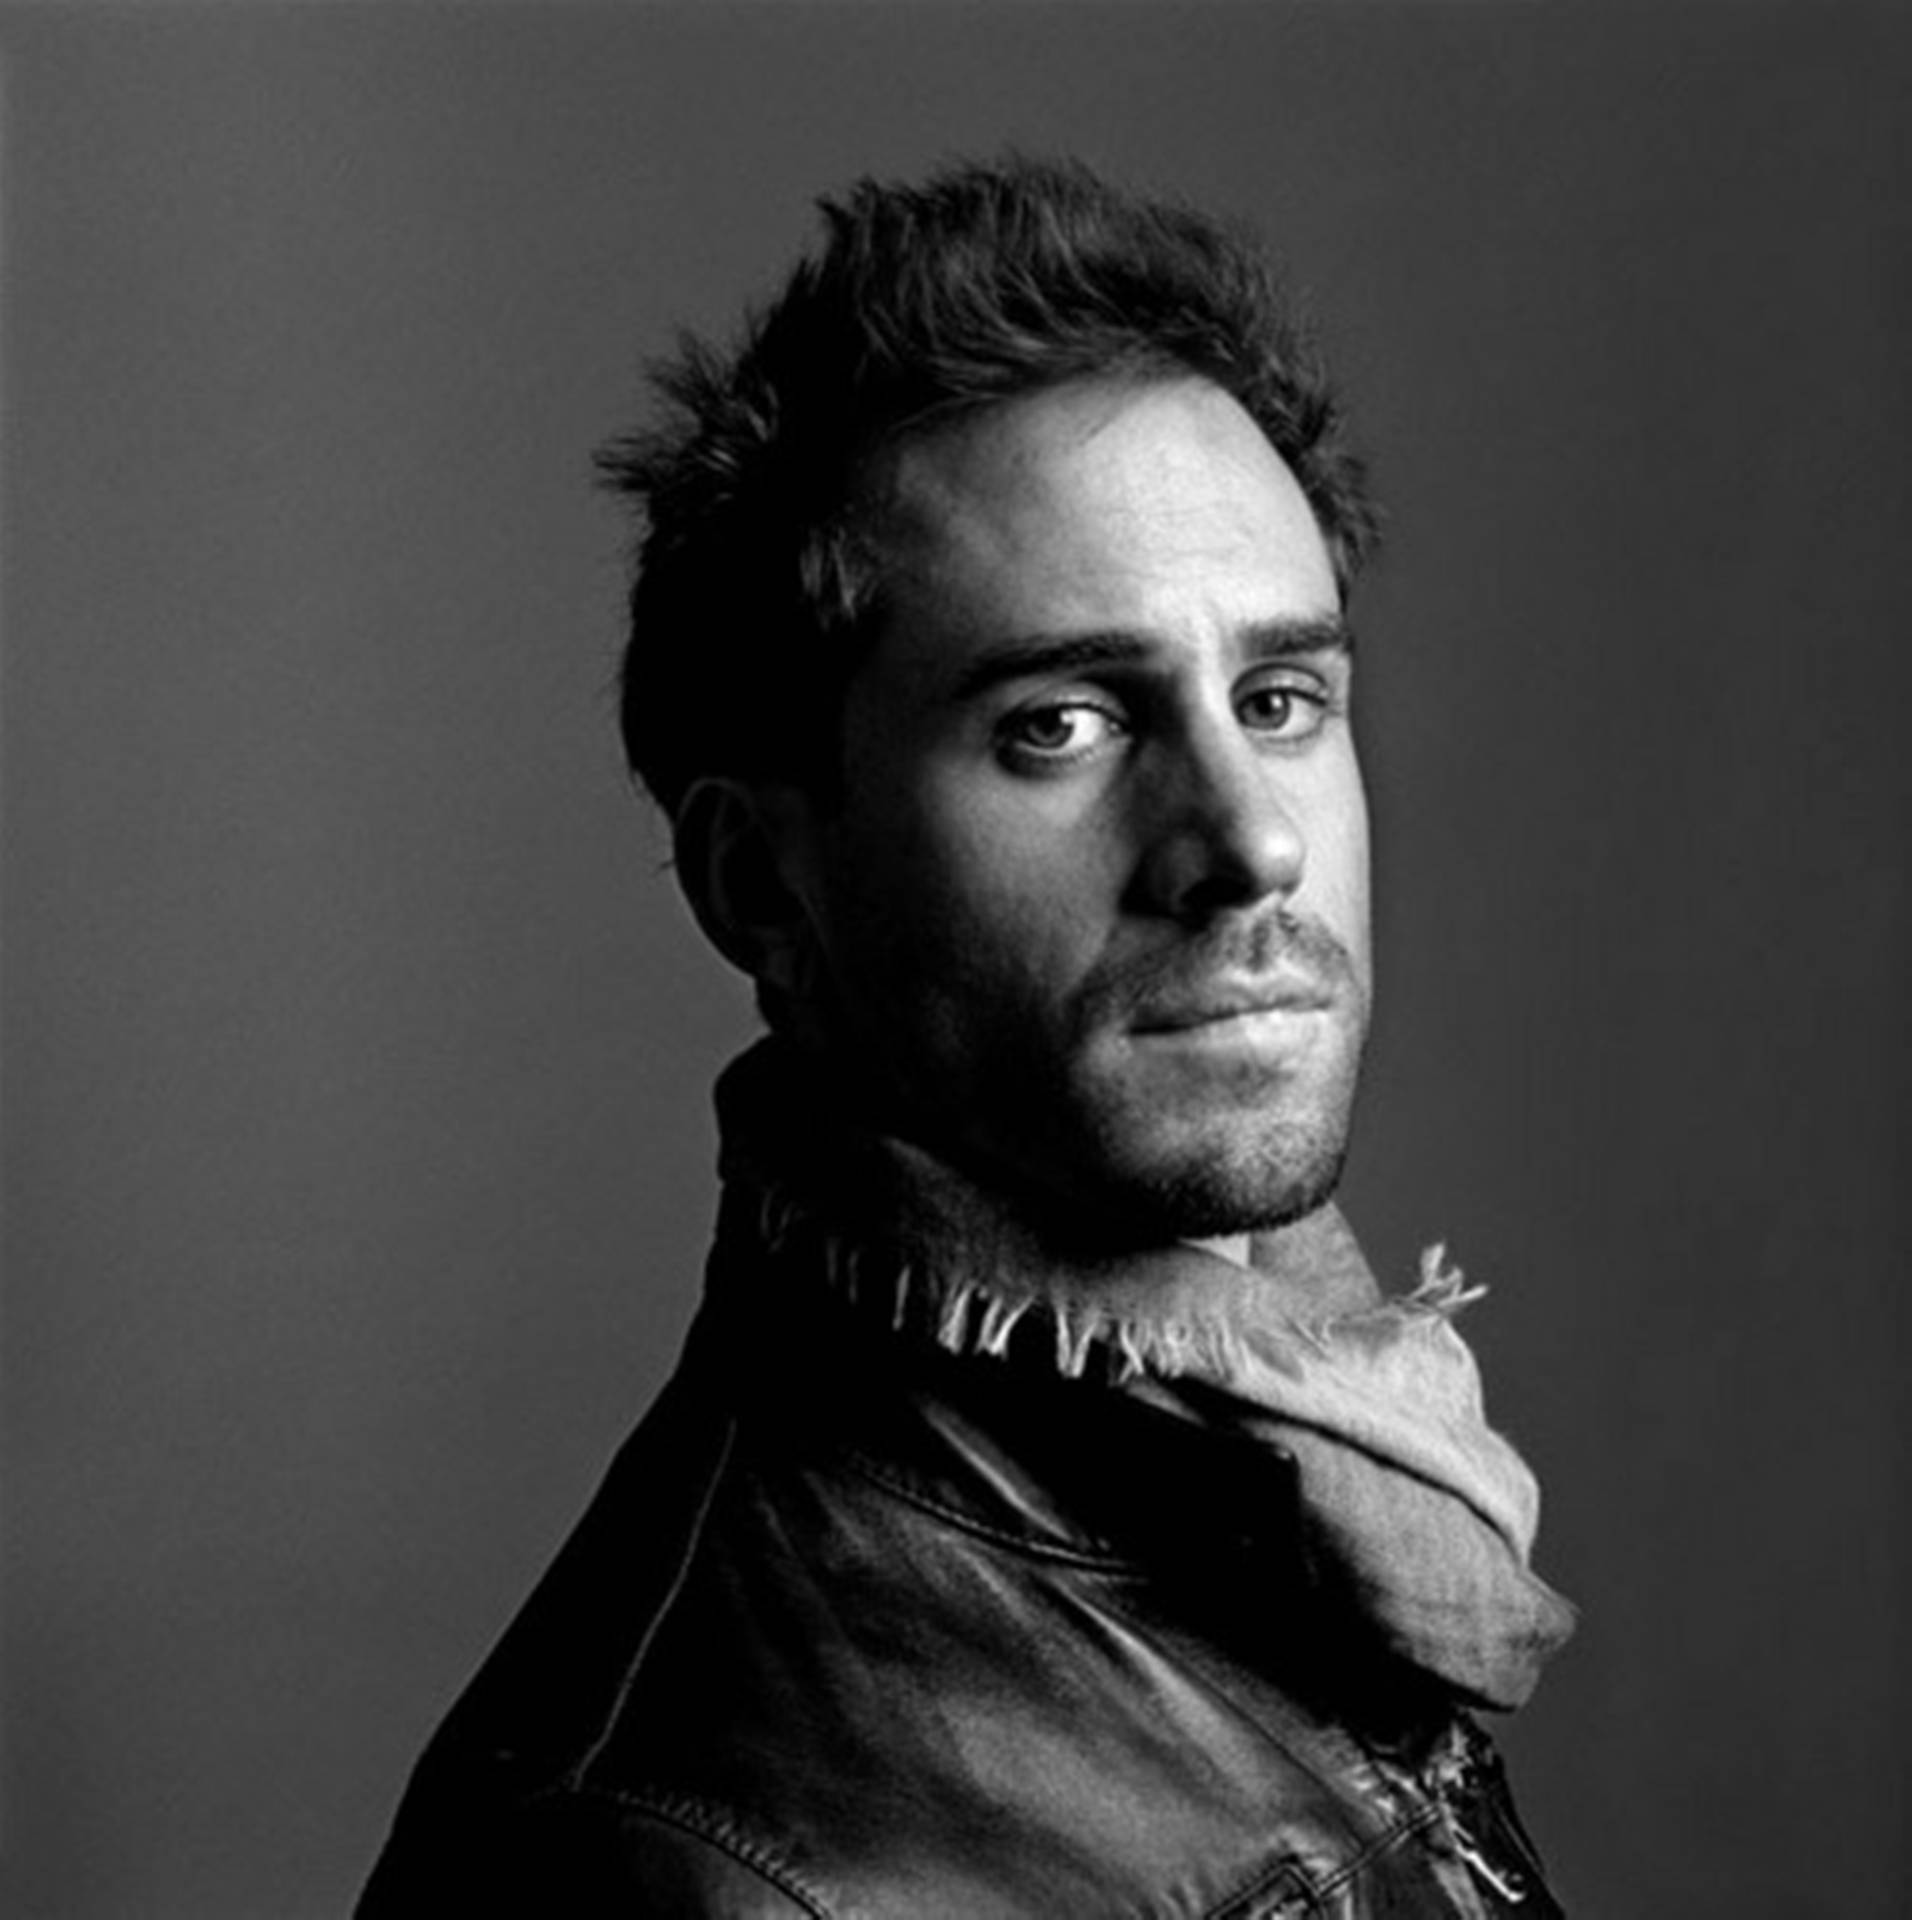 Timeless Elegance - A Black and White portrait of Actor Joseph Fiennes Wallpaper